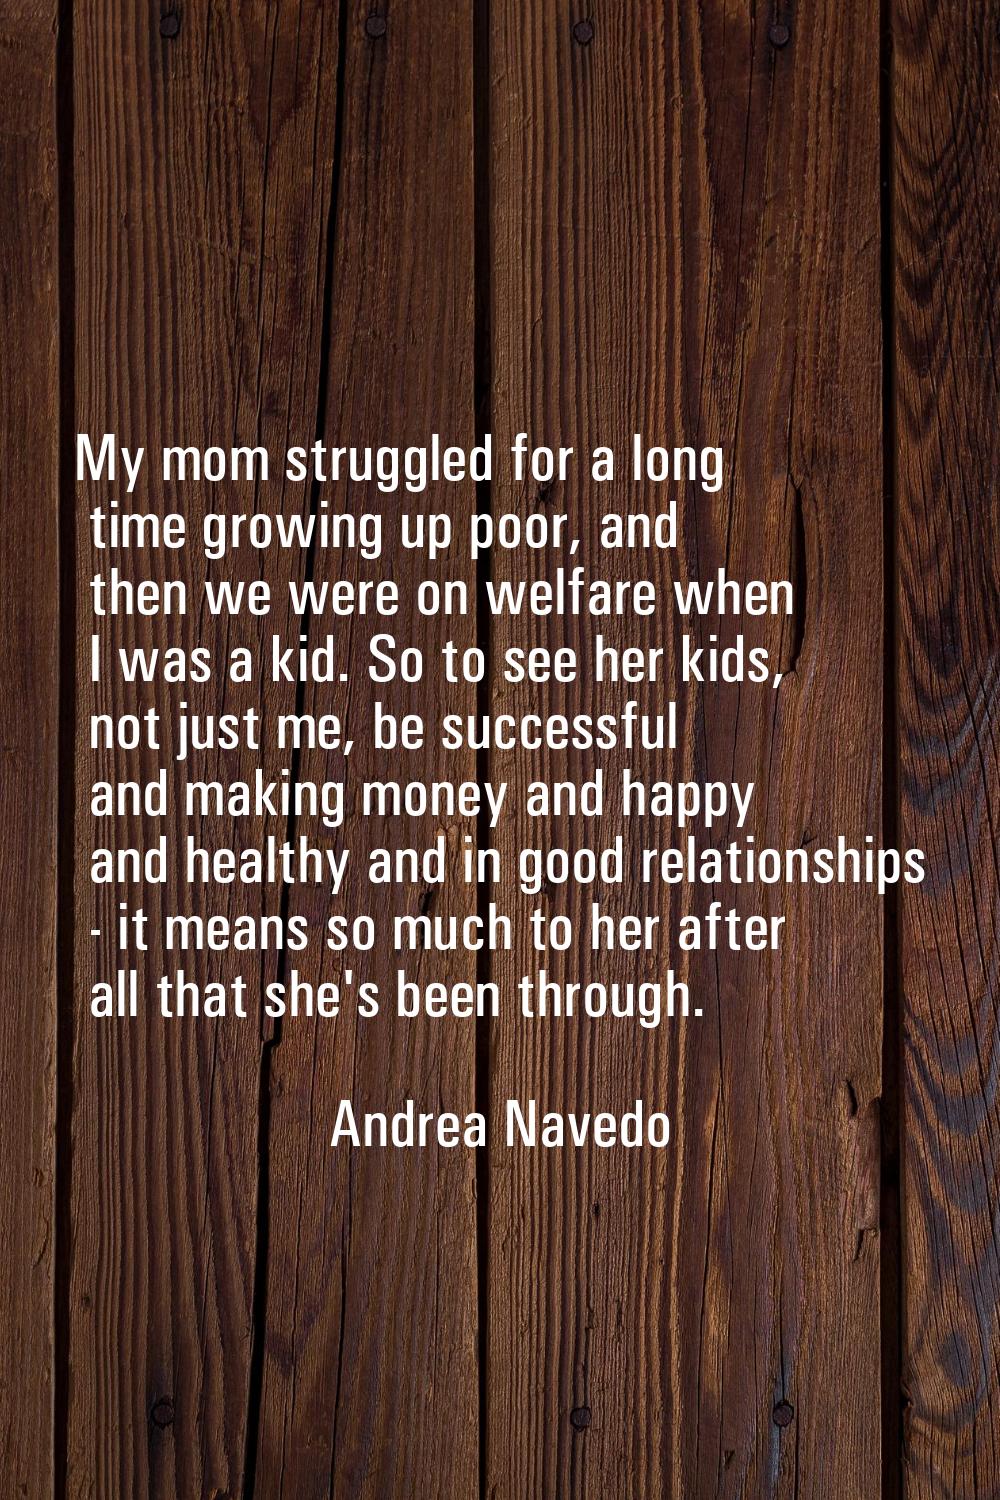 My mom struggled for a long time growing up poor, and then we were on welfare when I was a kid. So 